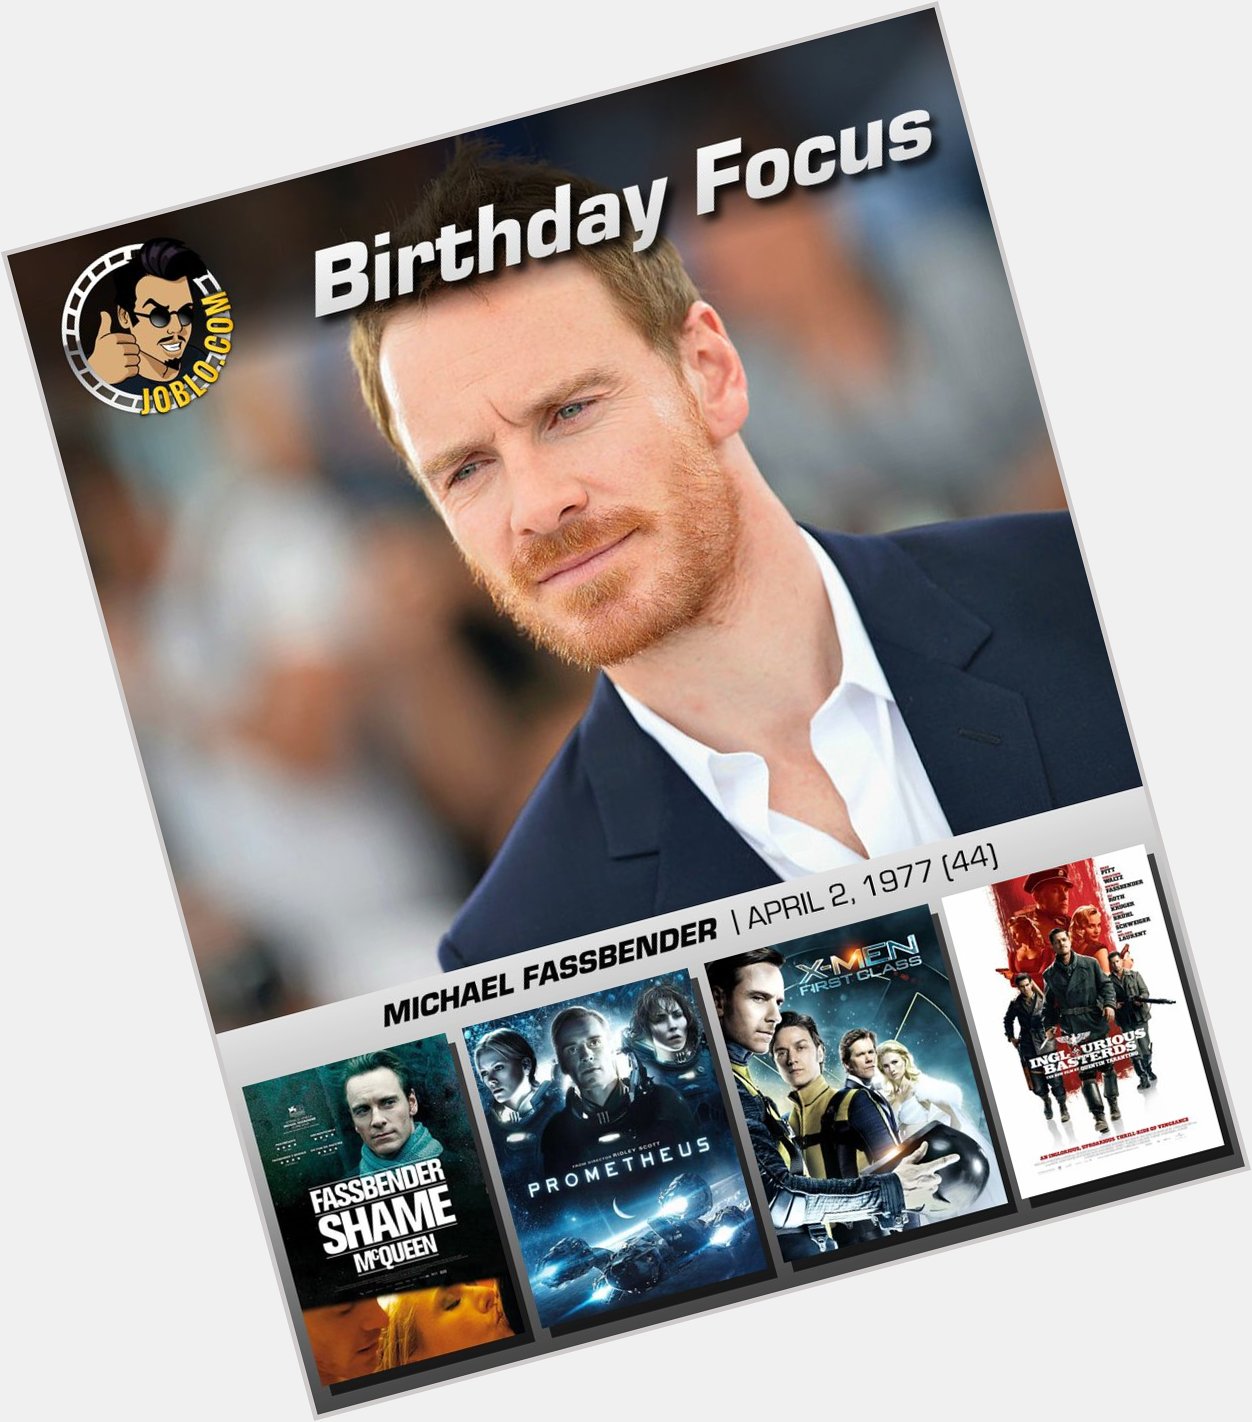 Wishing a very happy 44th birthday to Michael Fassbender! 